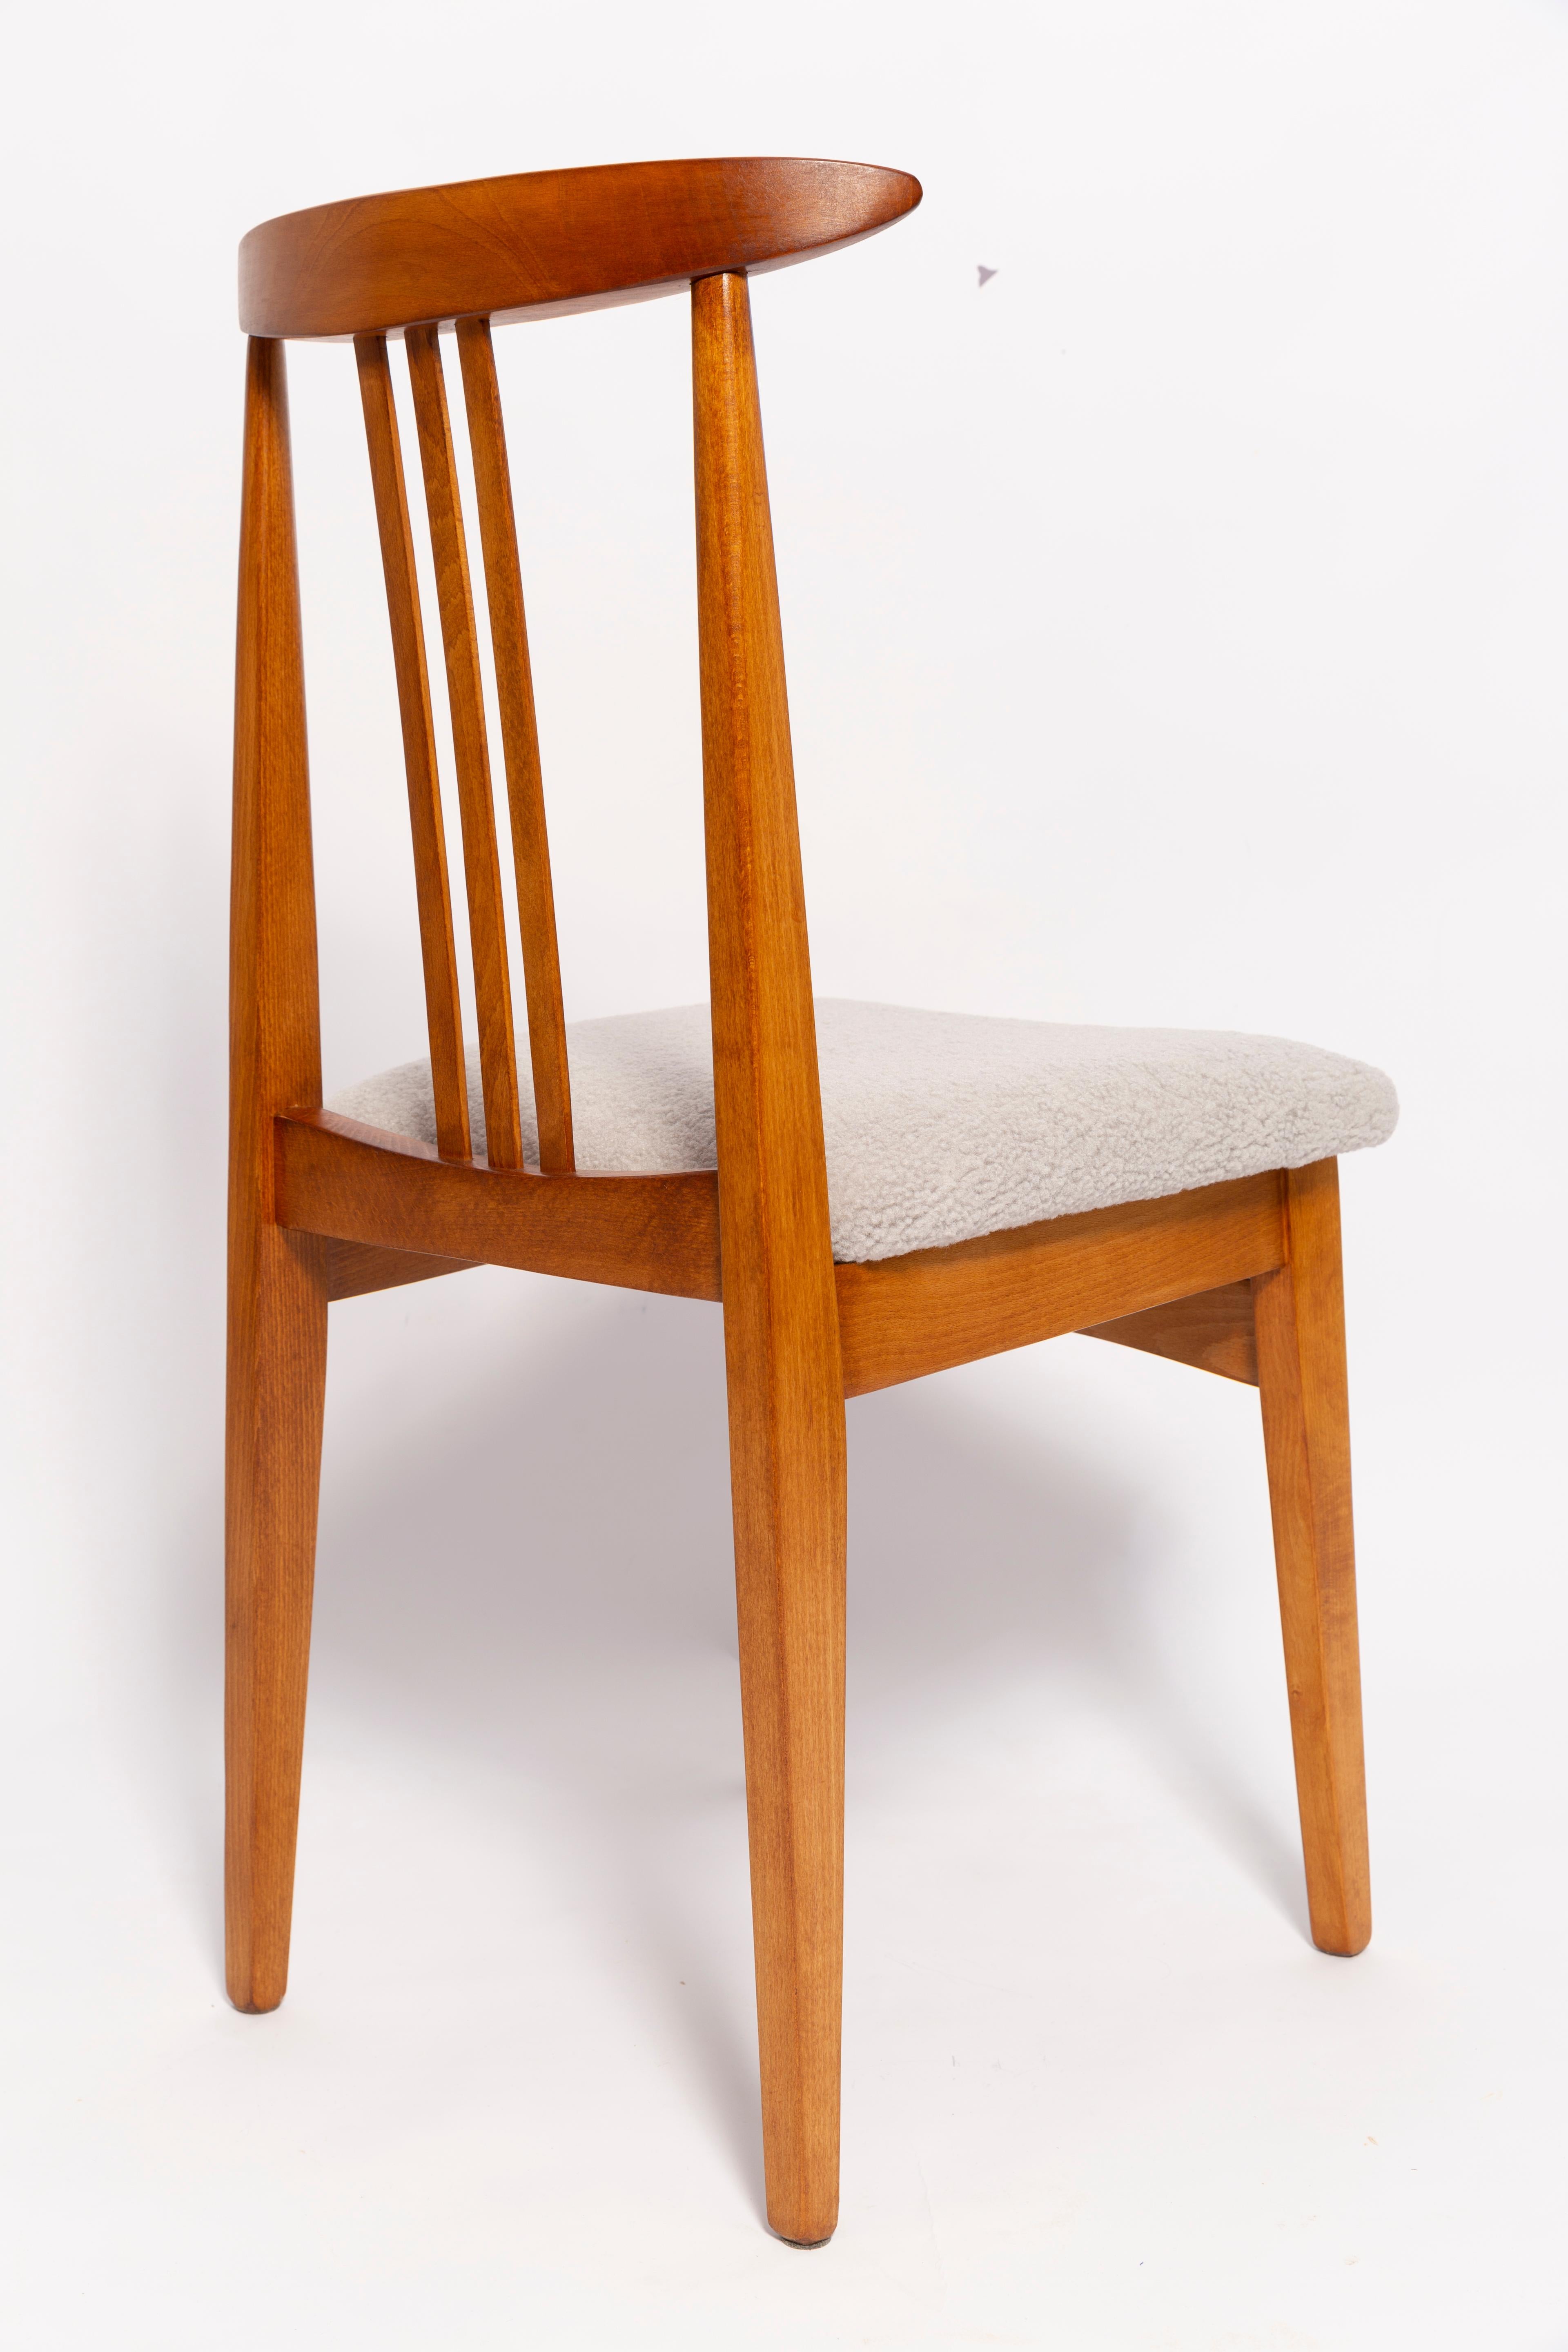 Hand-Crafted Mid-Century Linen Boucle Chair, Designed by M. Zielinski, Europe, 1960s For Sale